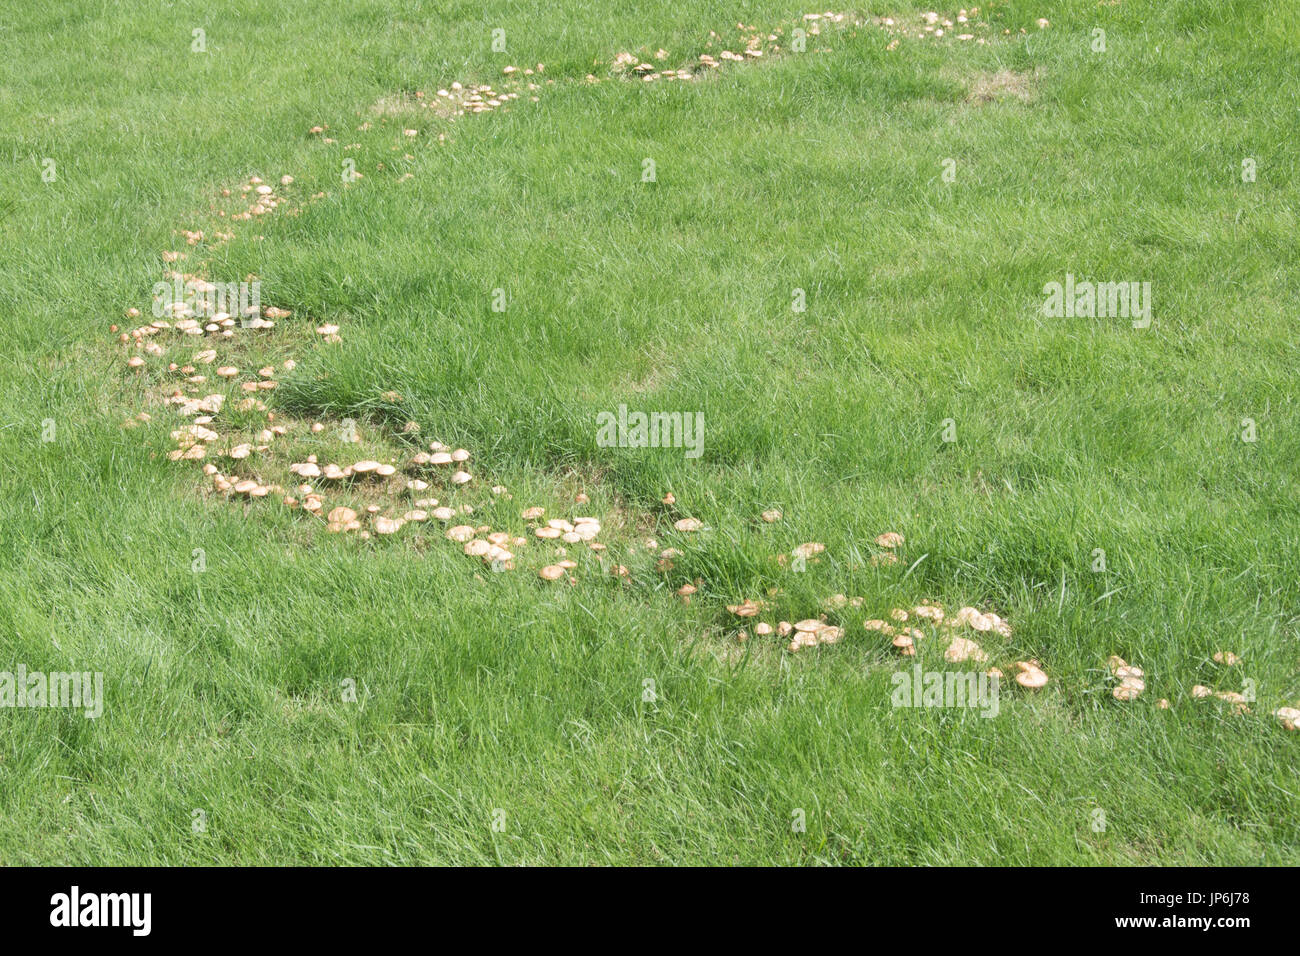 Fairy ring on lawns Stock Photo